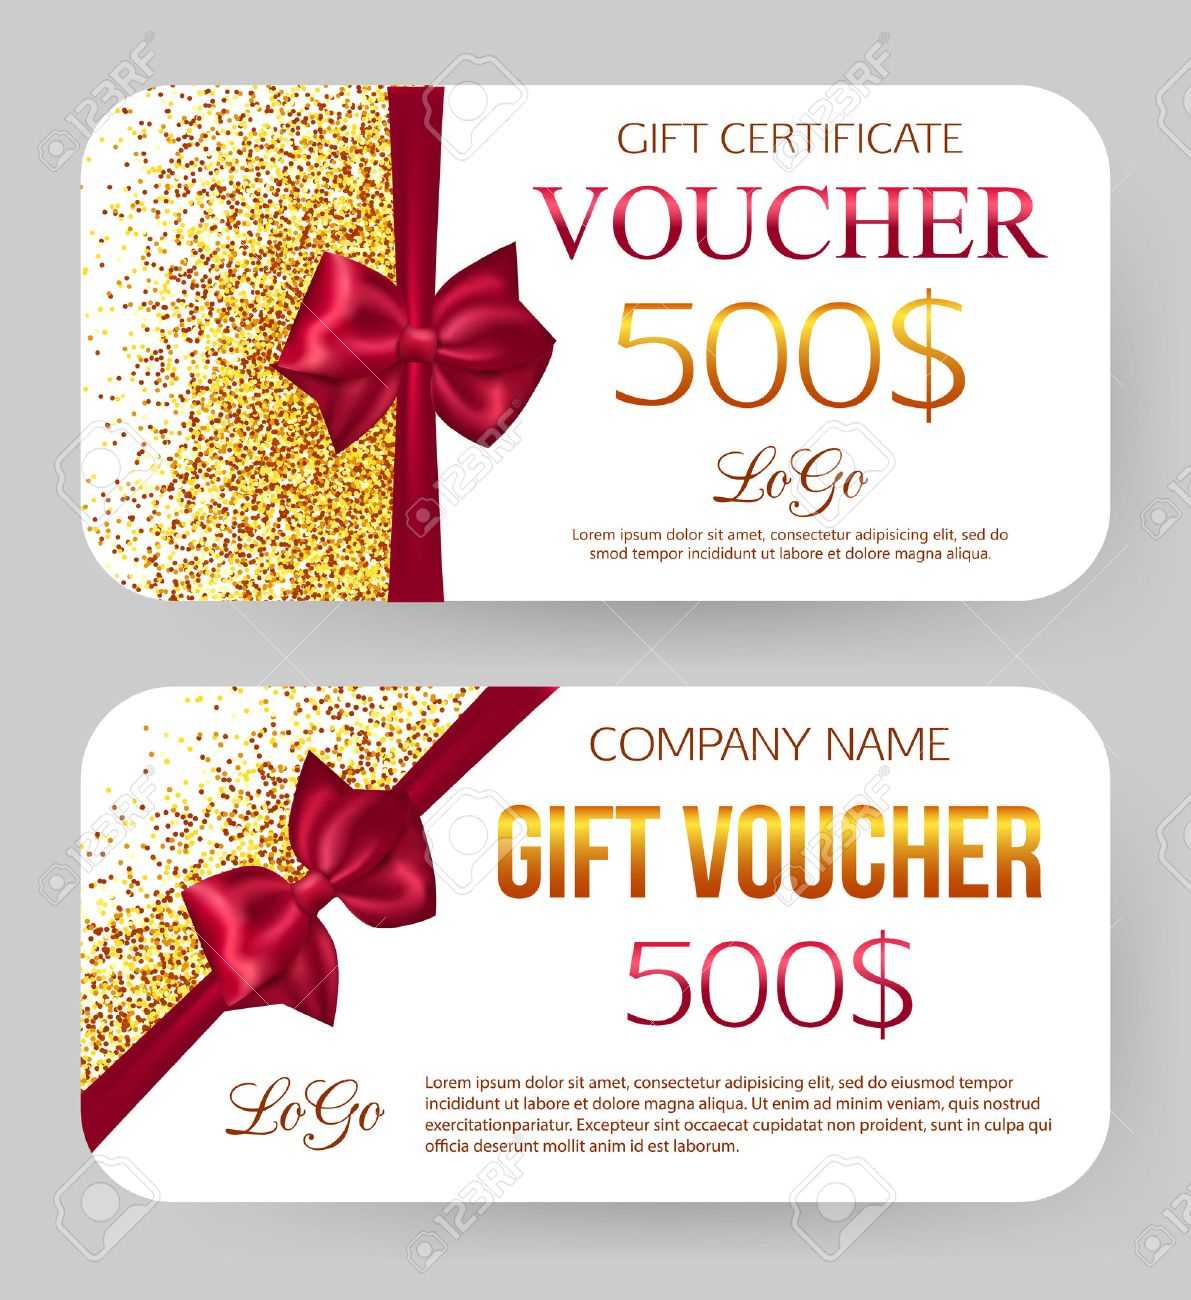 Gift Voucher Template. Golden Design For Gift Certificate Coupon Within Magazine Subscription Gift Certificate Template